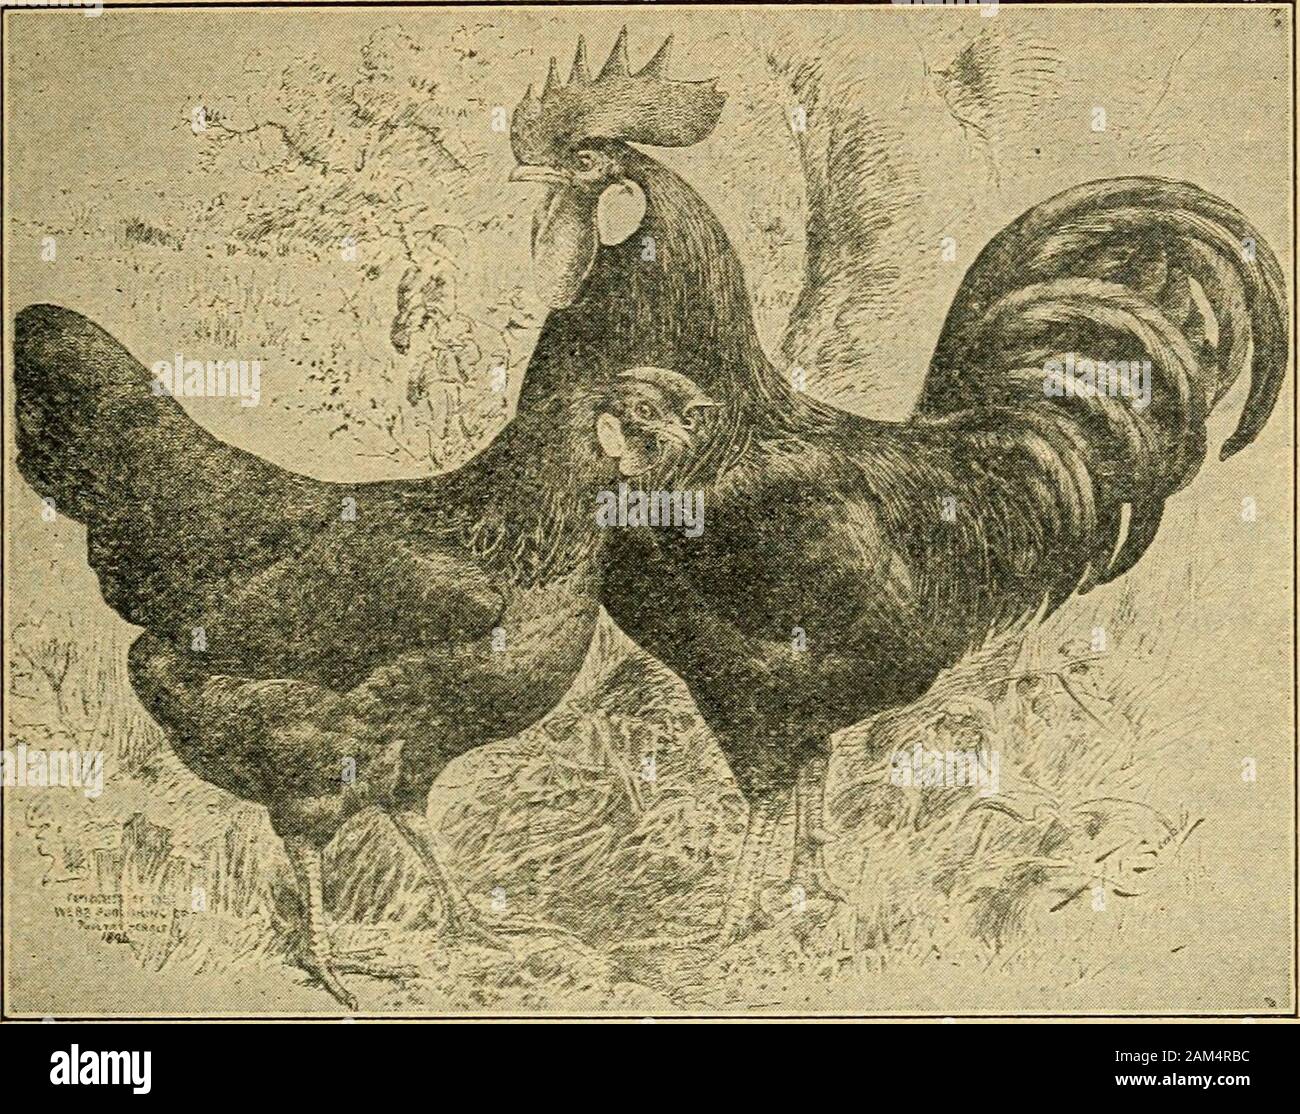 The poultry manual; a guide to successful poultry keeping in all its branches, fancy and practical . LEGHORNS. 43. Single Comb Brown Leghorn Male and Female, splendid body is carried a finely chiseled head, with flashing redeyes and ear lobes in texture and color like the newest whitekid. Drooping from the throat at the juncture of the beak arethe pendent wattles, and surmounting all, the crowning attrac-tion of the race, the coral-like comb with its long, finely taperedserrations. These genteel birds are the leaders for haremswhere beauty and industry go equally coupled, for the hard-working Stock Photo